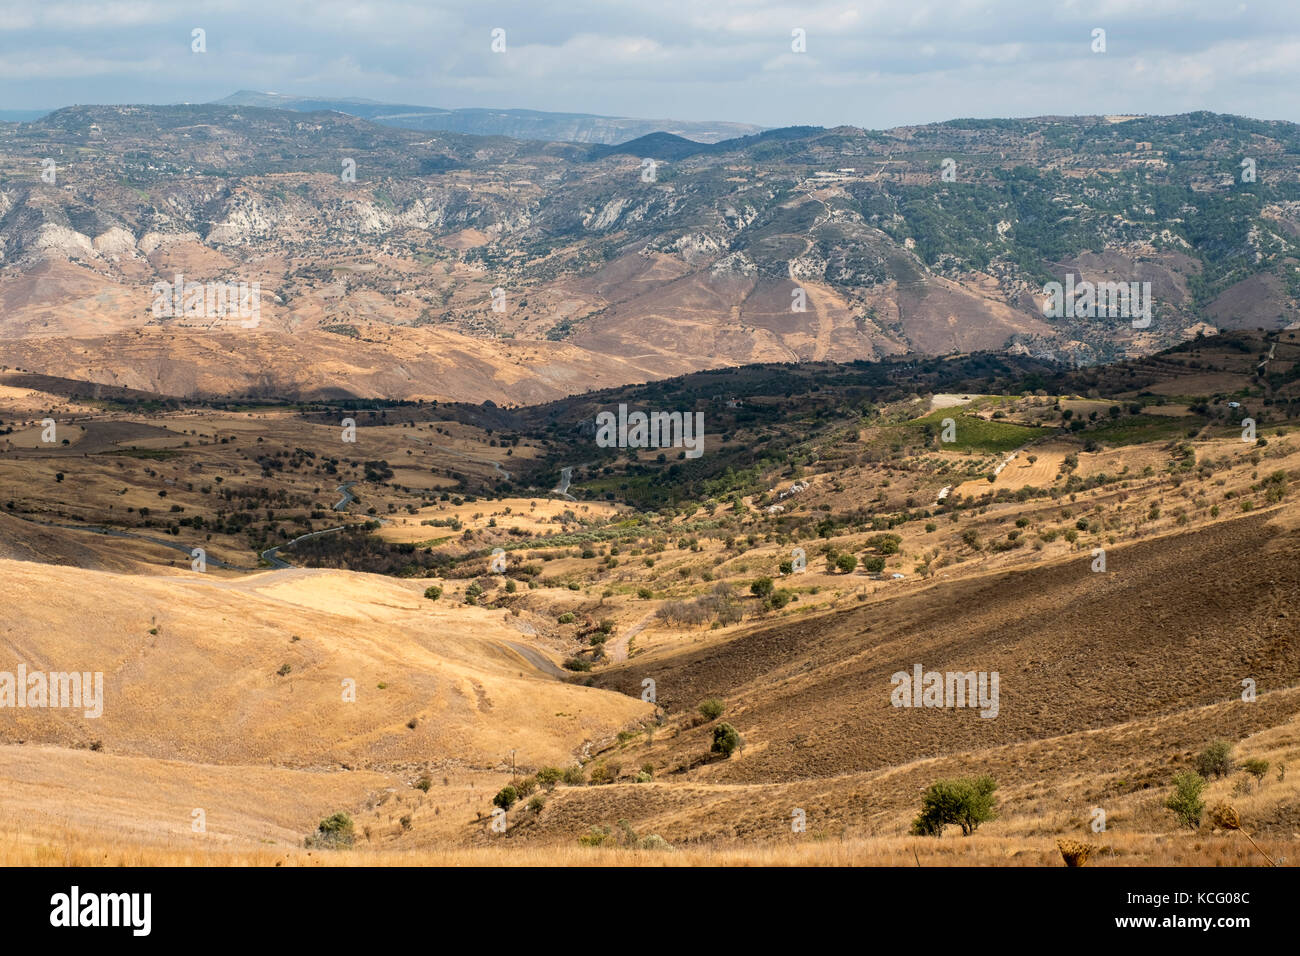 A view of agricultural land and the foothills of the Troodos Massif mountain range to the north, Paphos region, Cyprus. Stock Photo